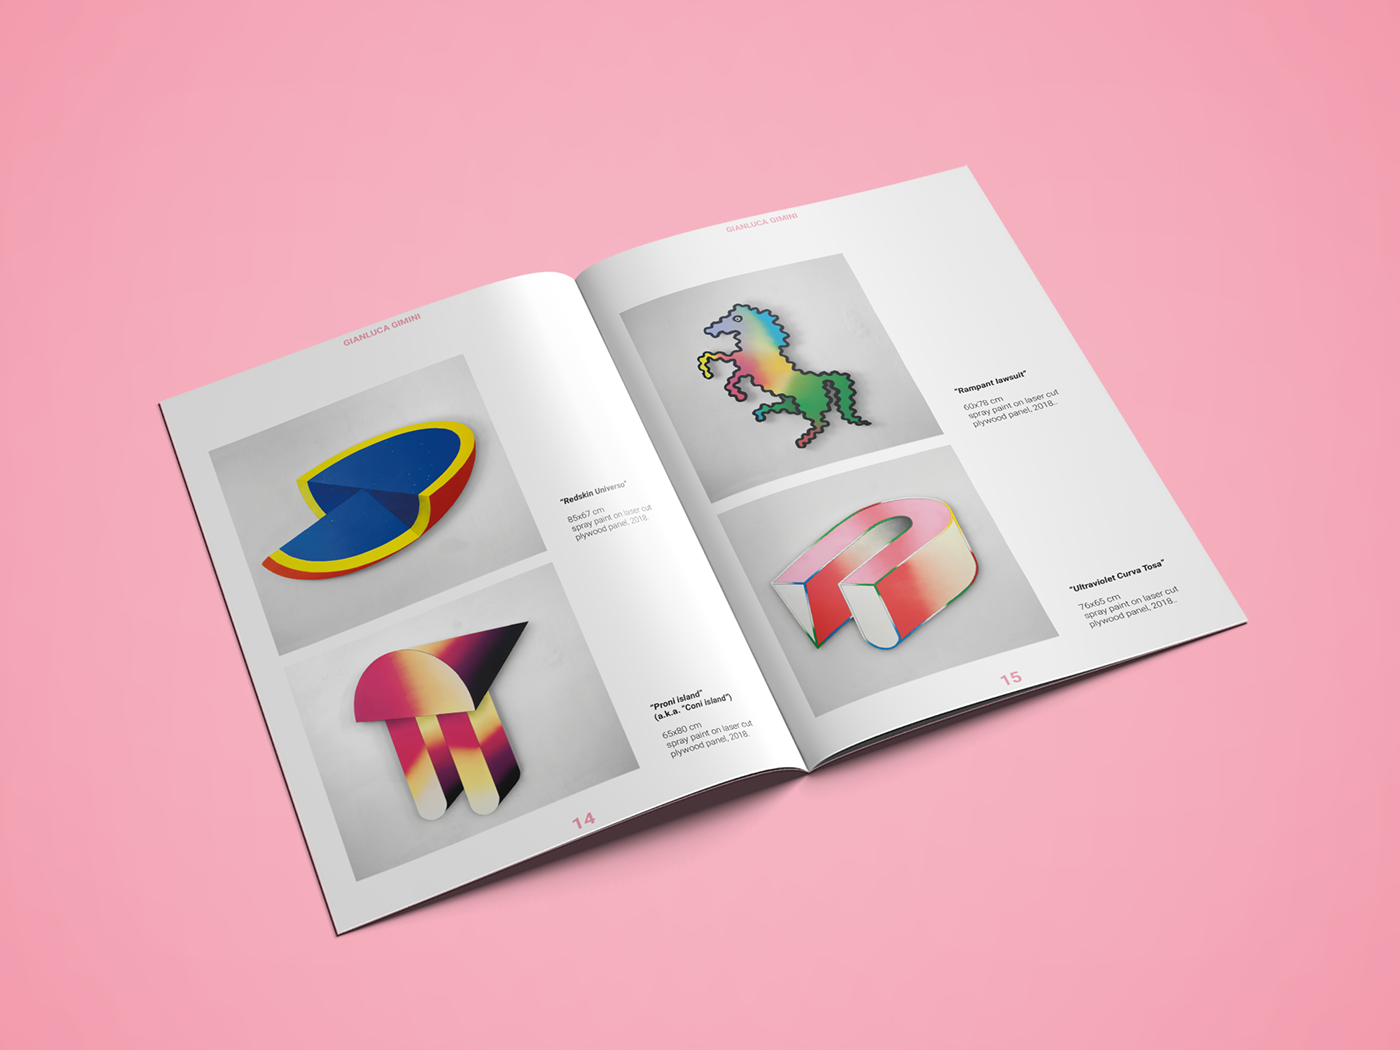 exhibit communication after effects InDesign Illustrator photoshop poster book fanzine Italy